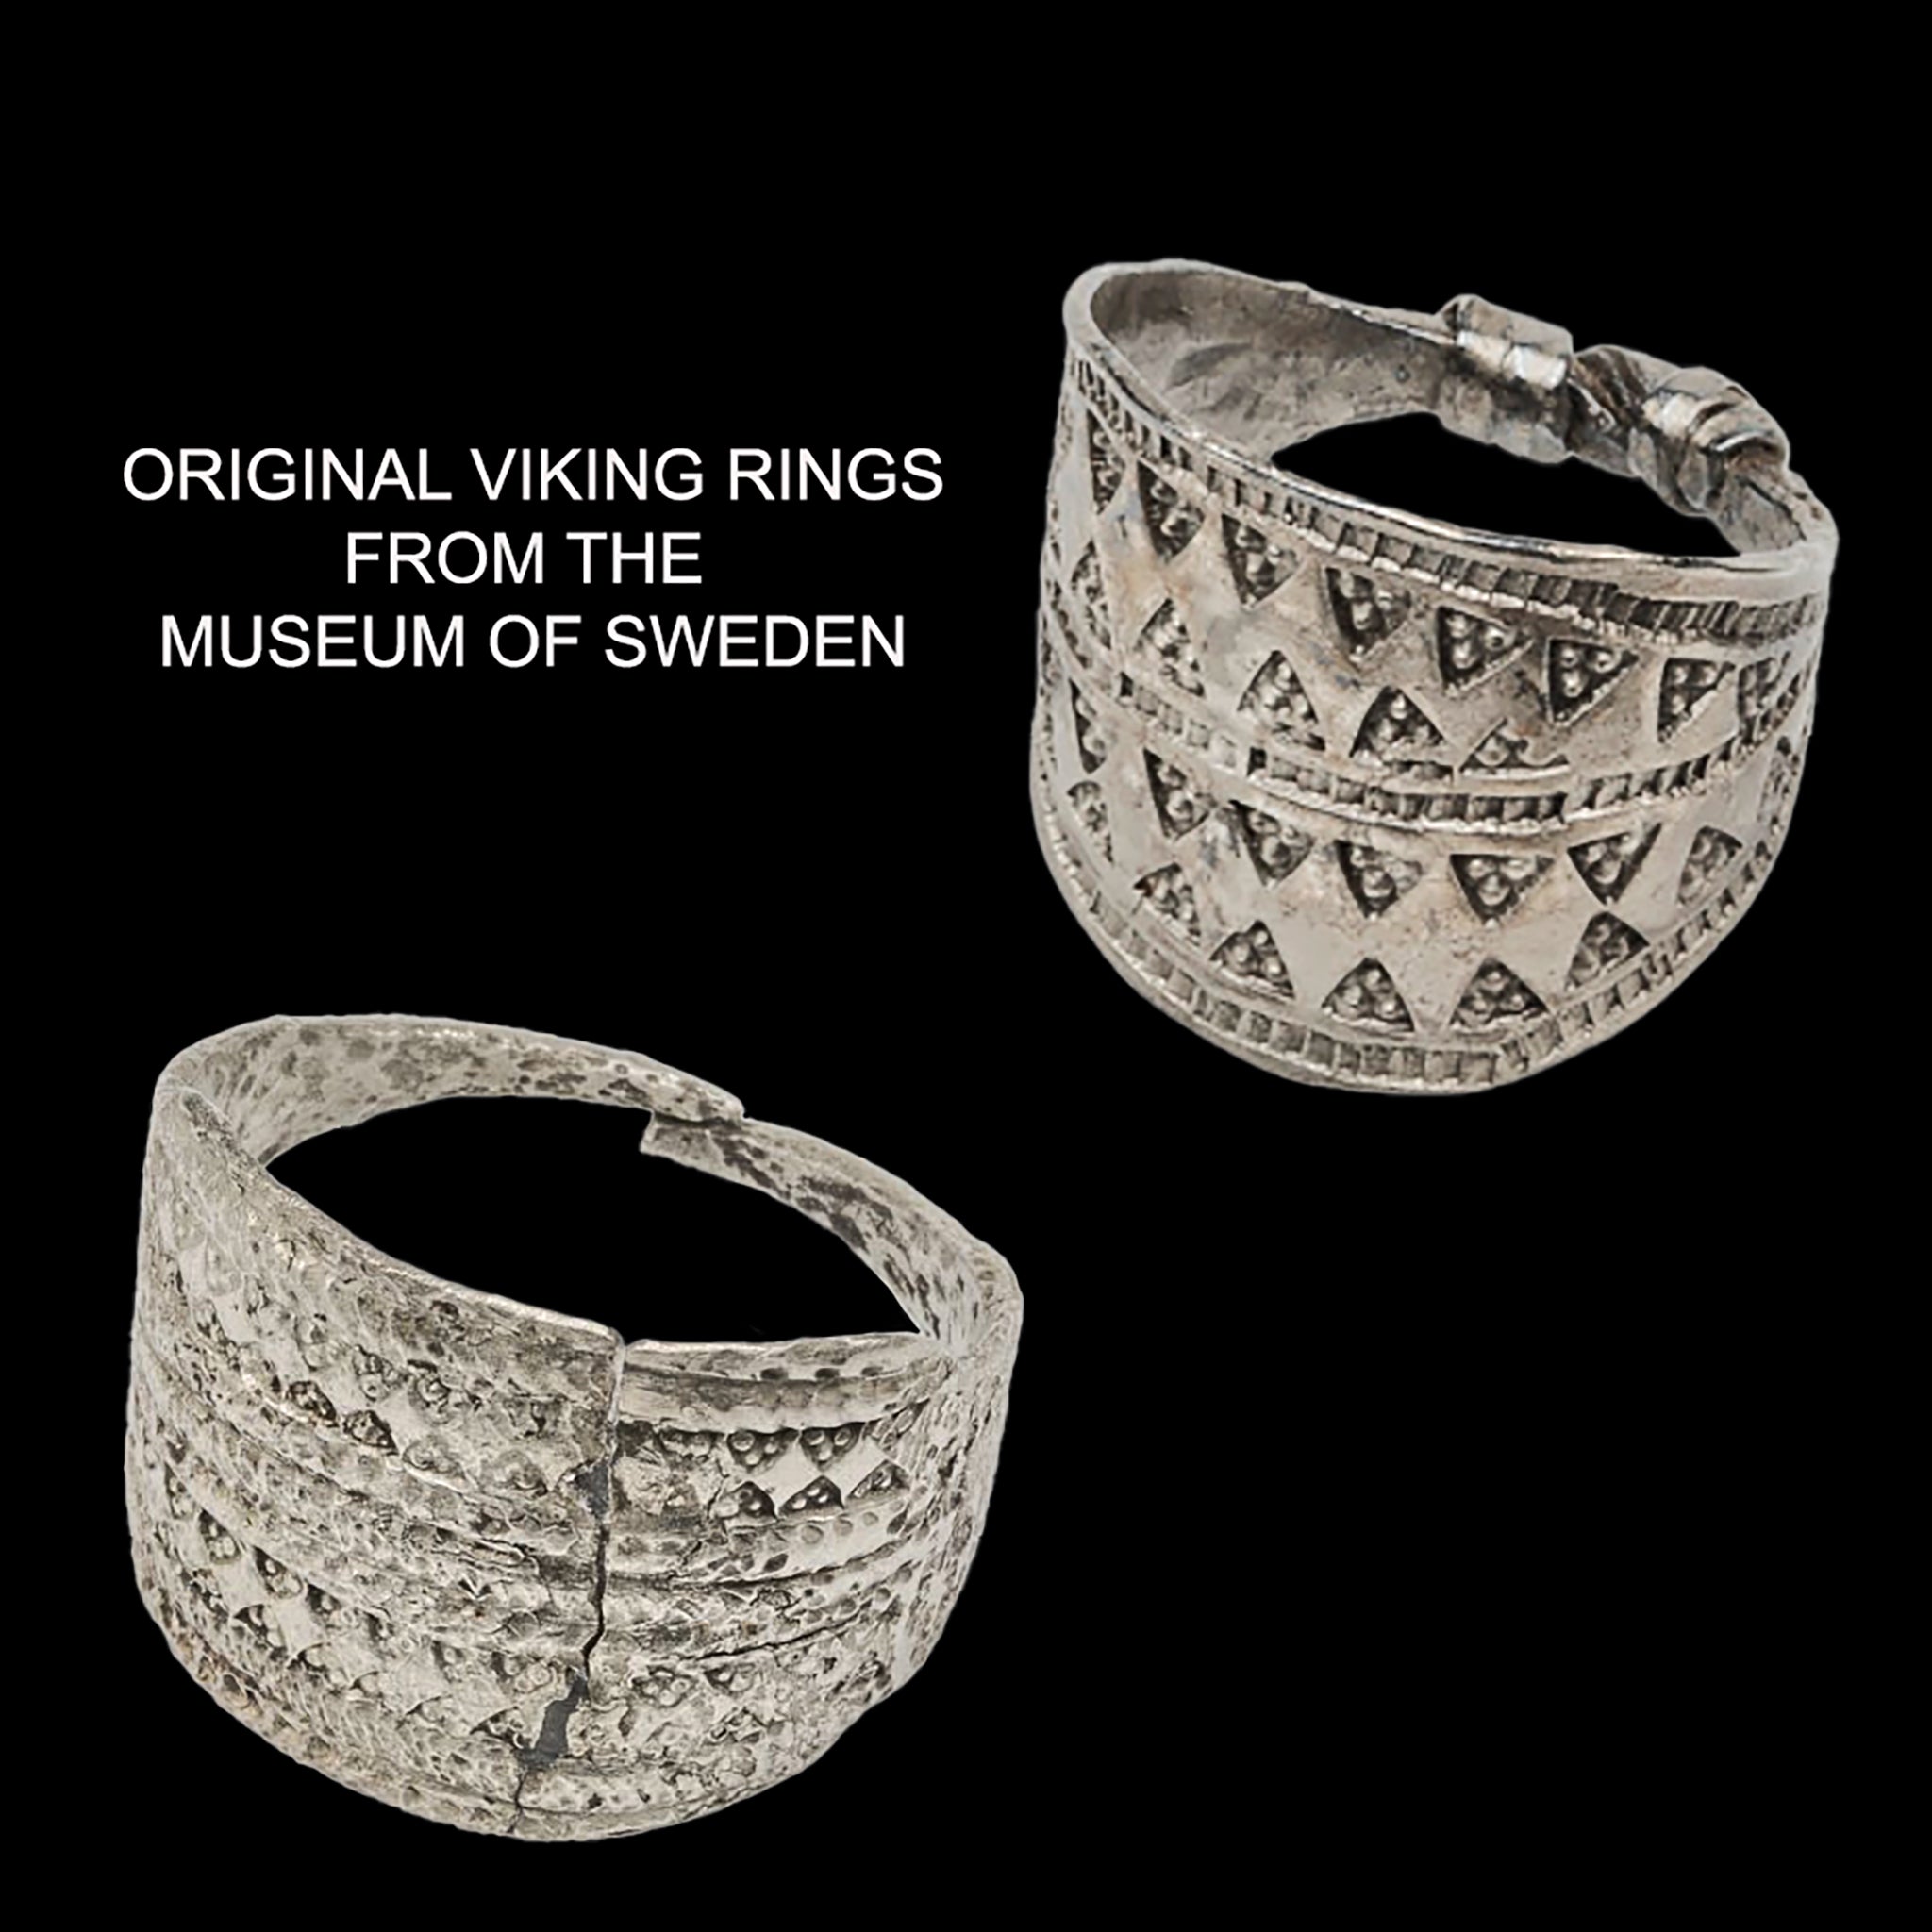 Original Viking rings from the Rone Hoard, Gotland, Sweden. Now in the Museum of Sweden